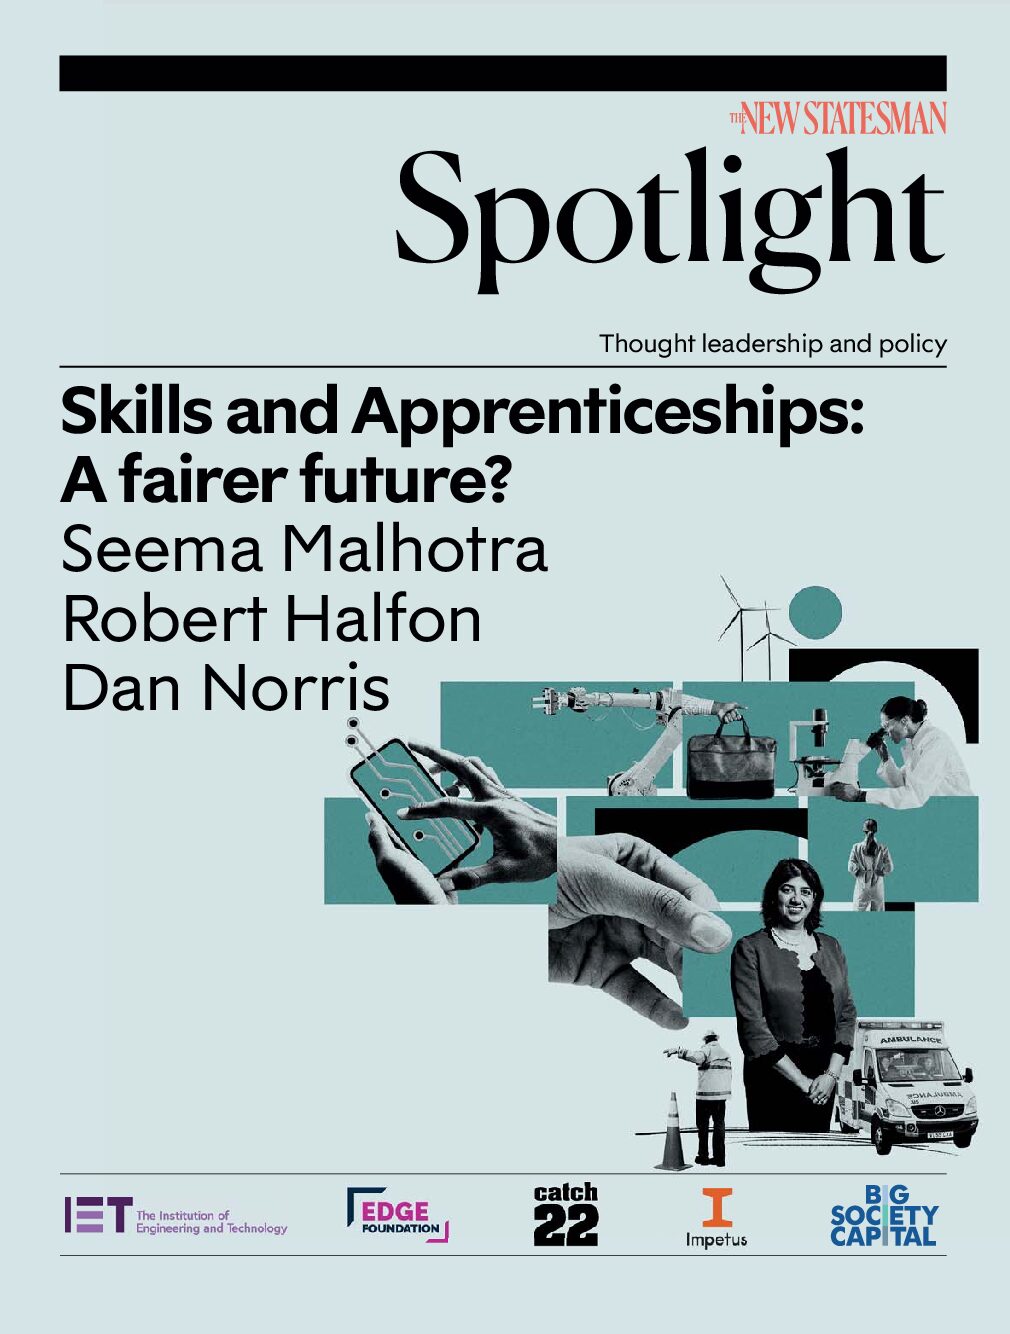 Skills and Apprenticeships: A fairer future?